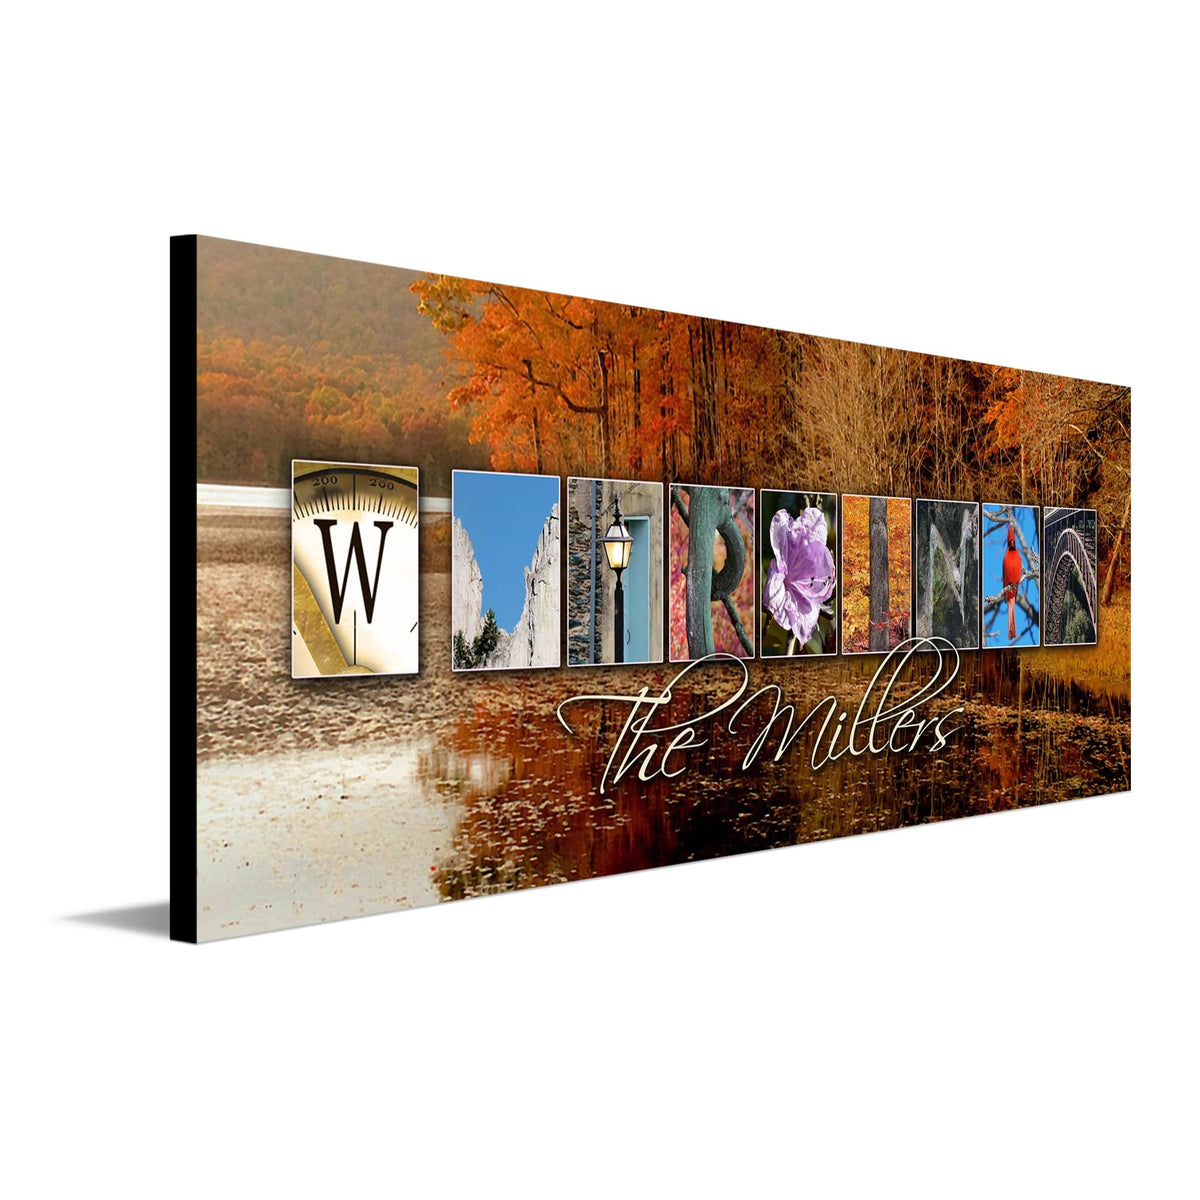 Personalized West Virginia art using images from the state to spell the words West Virginia - Personal-Prints